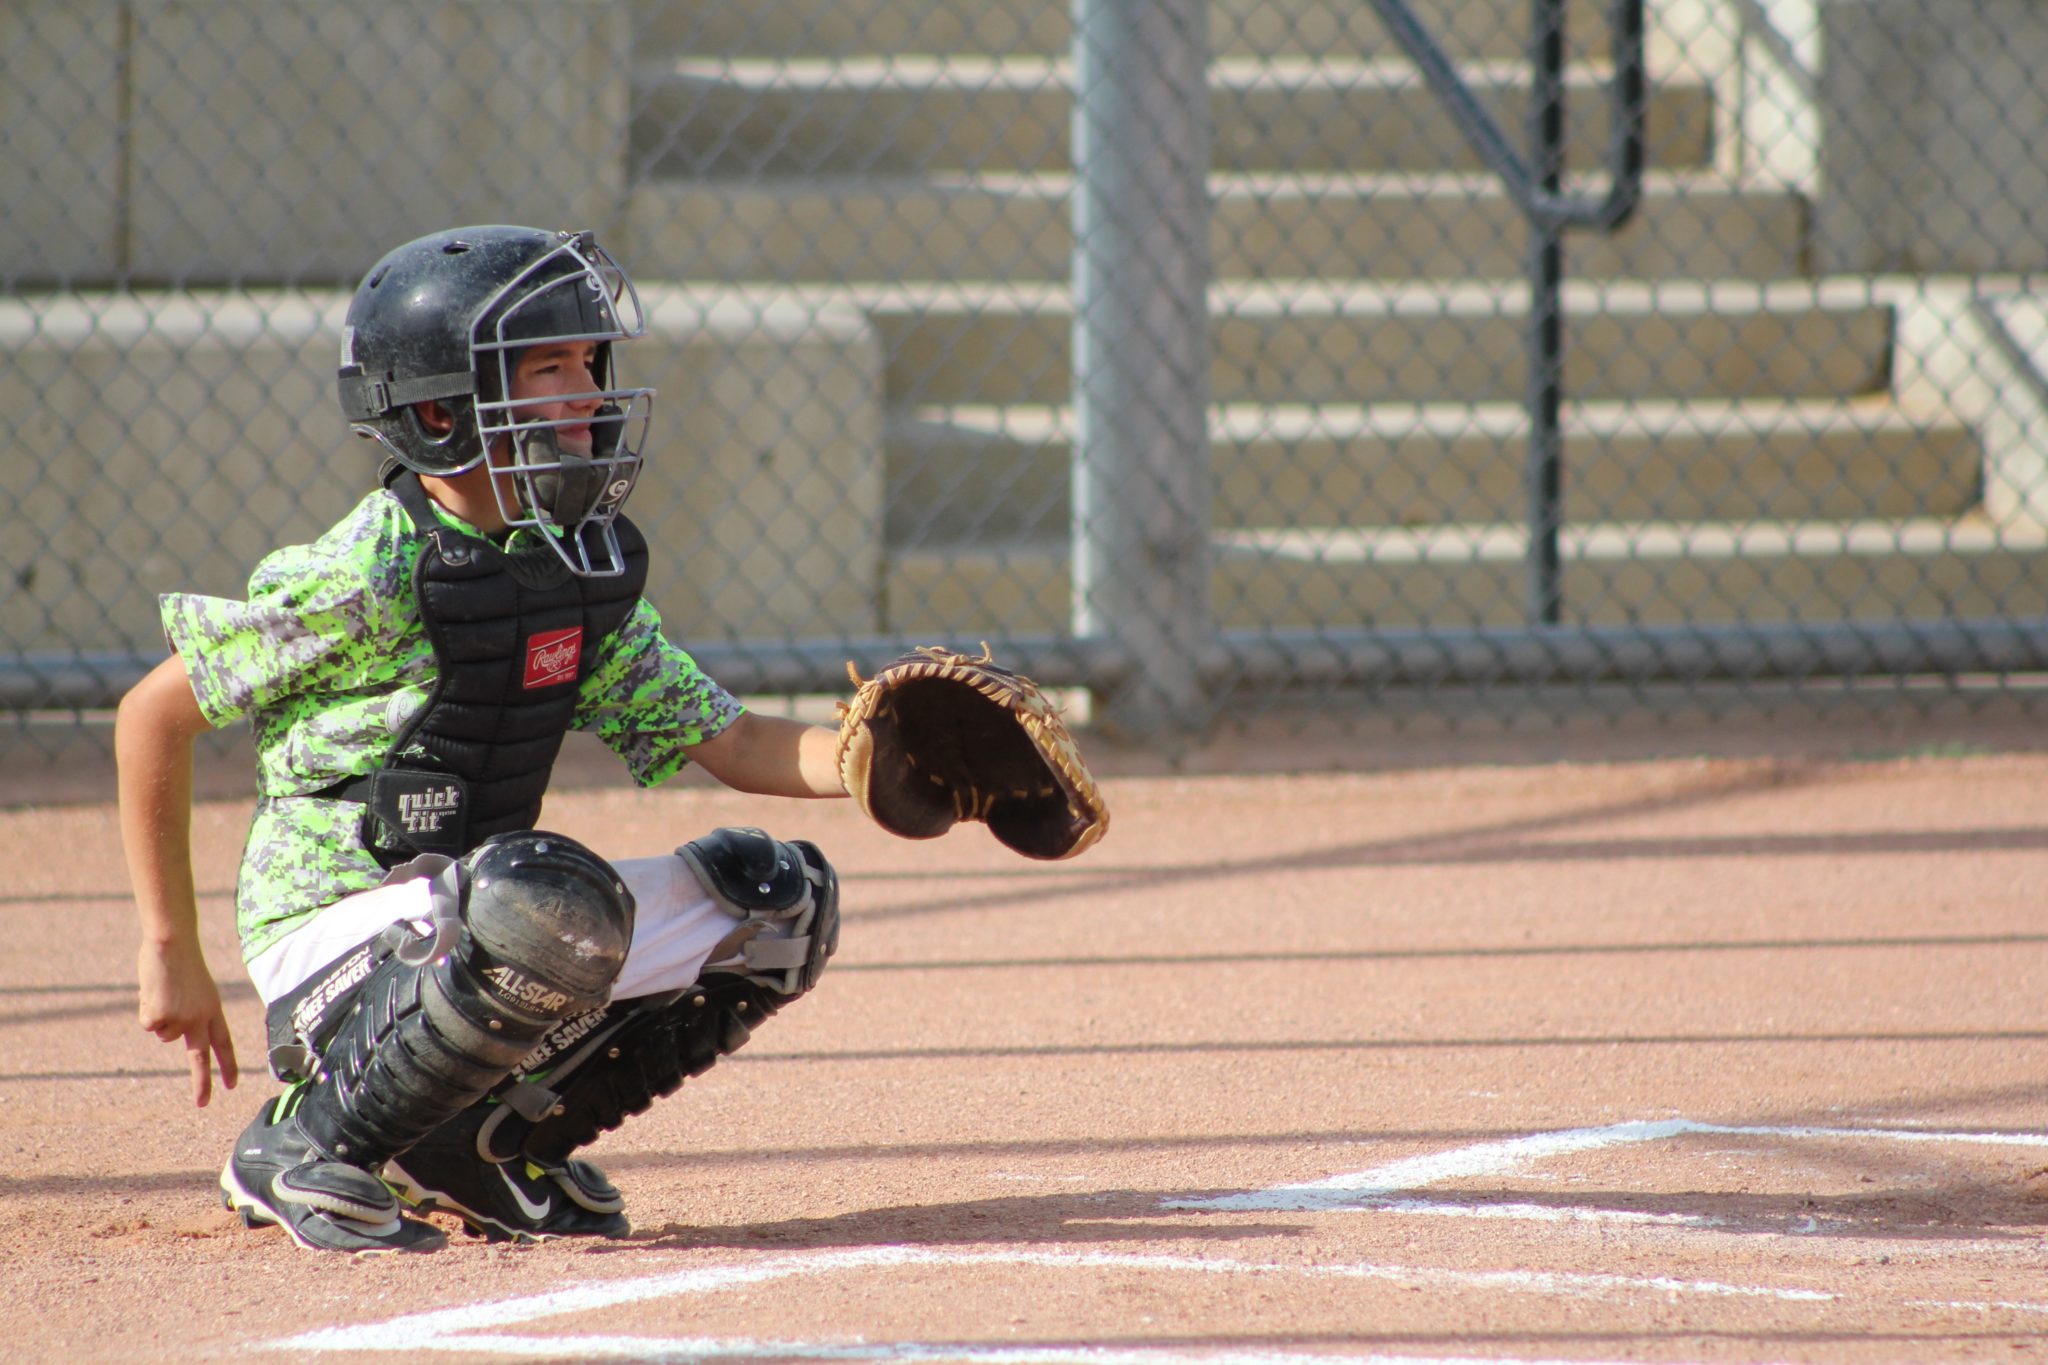 catchercrouching-on-field-giving-hand-signals